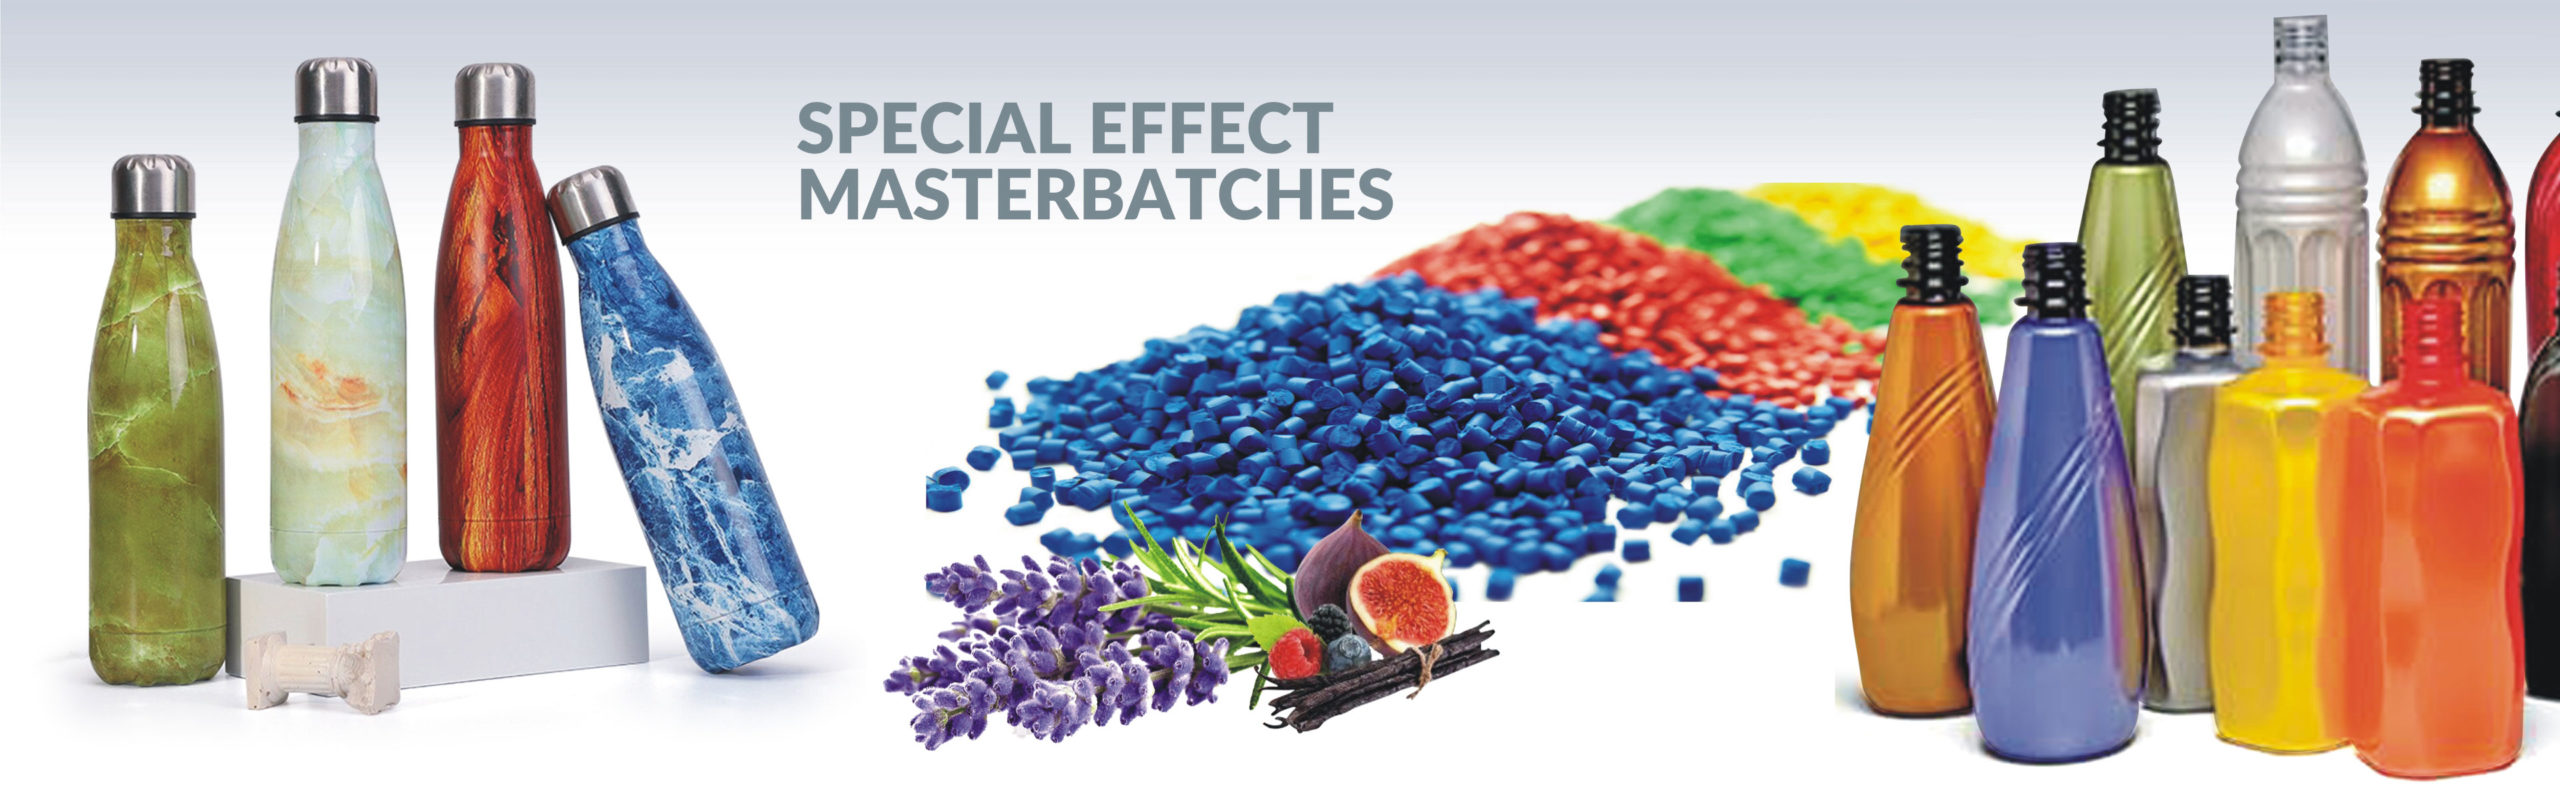 Special Effect Masterbatches